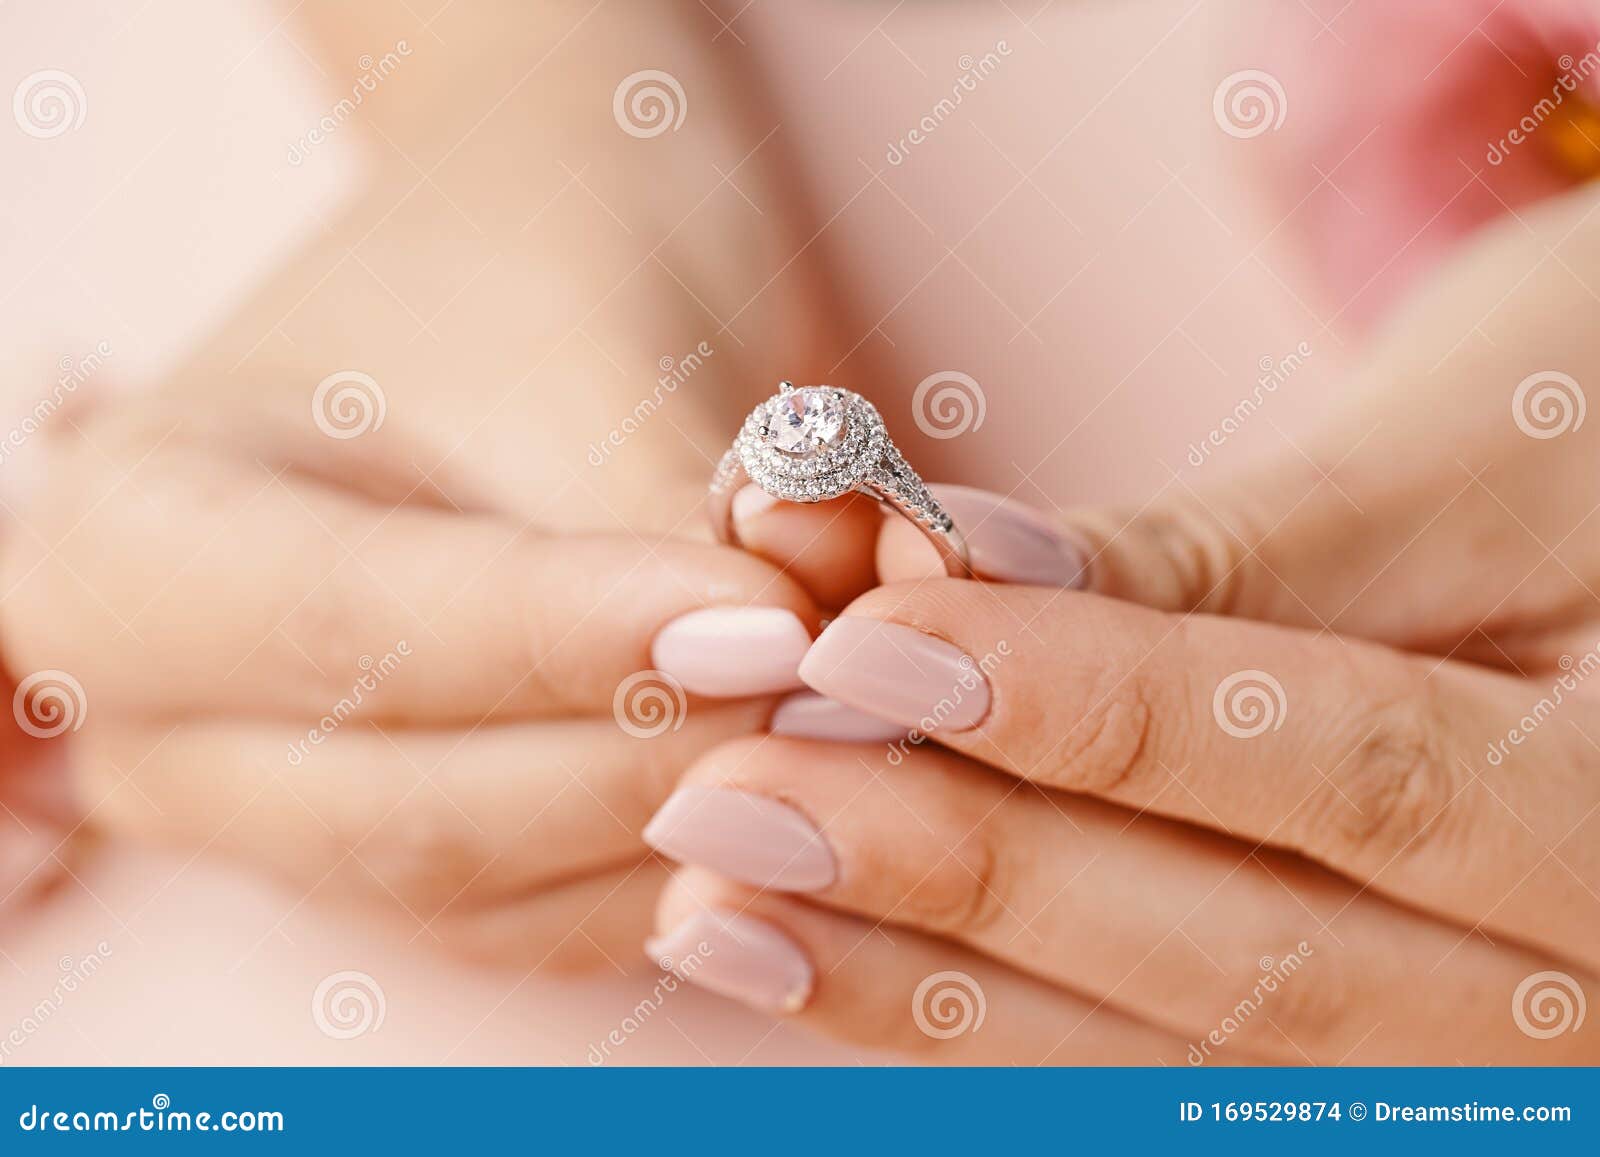 Premium Photo | Engagement ring with a stone on the gentle bride's hand